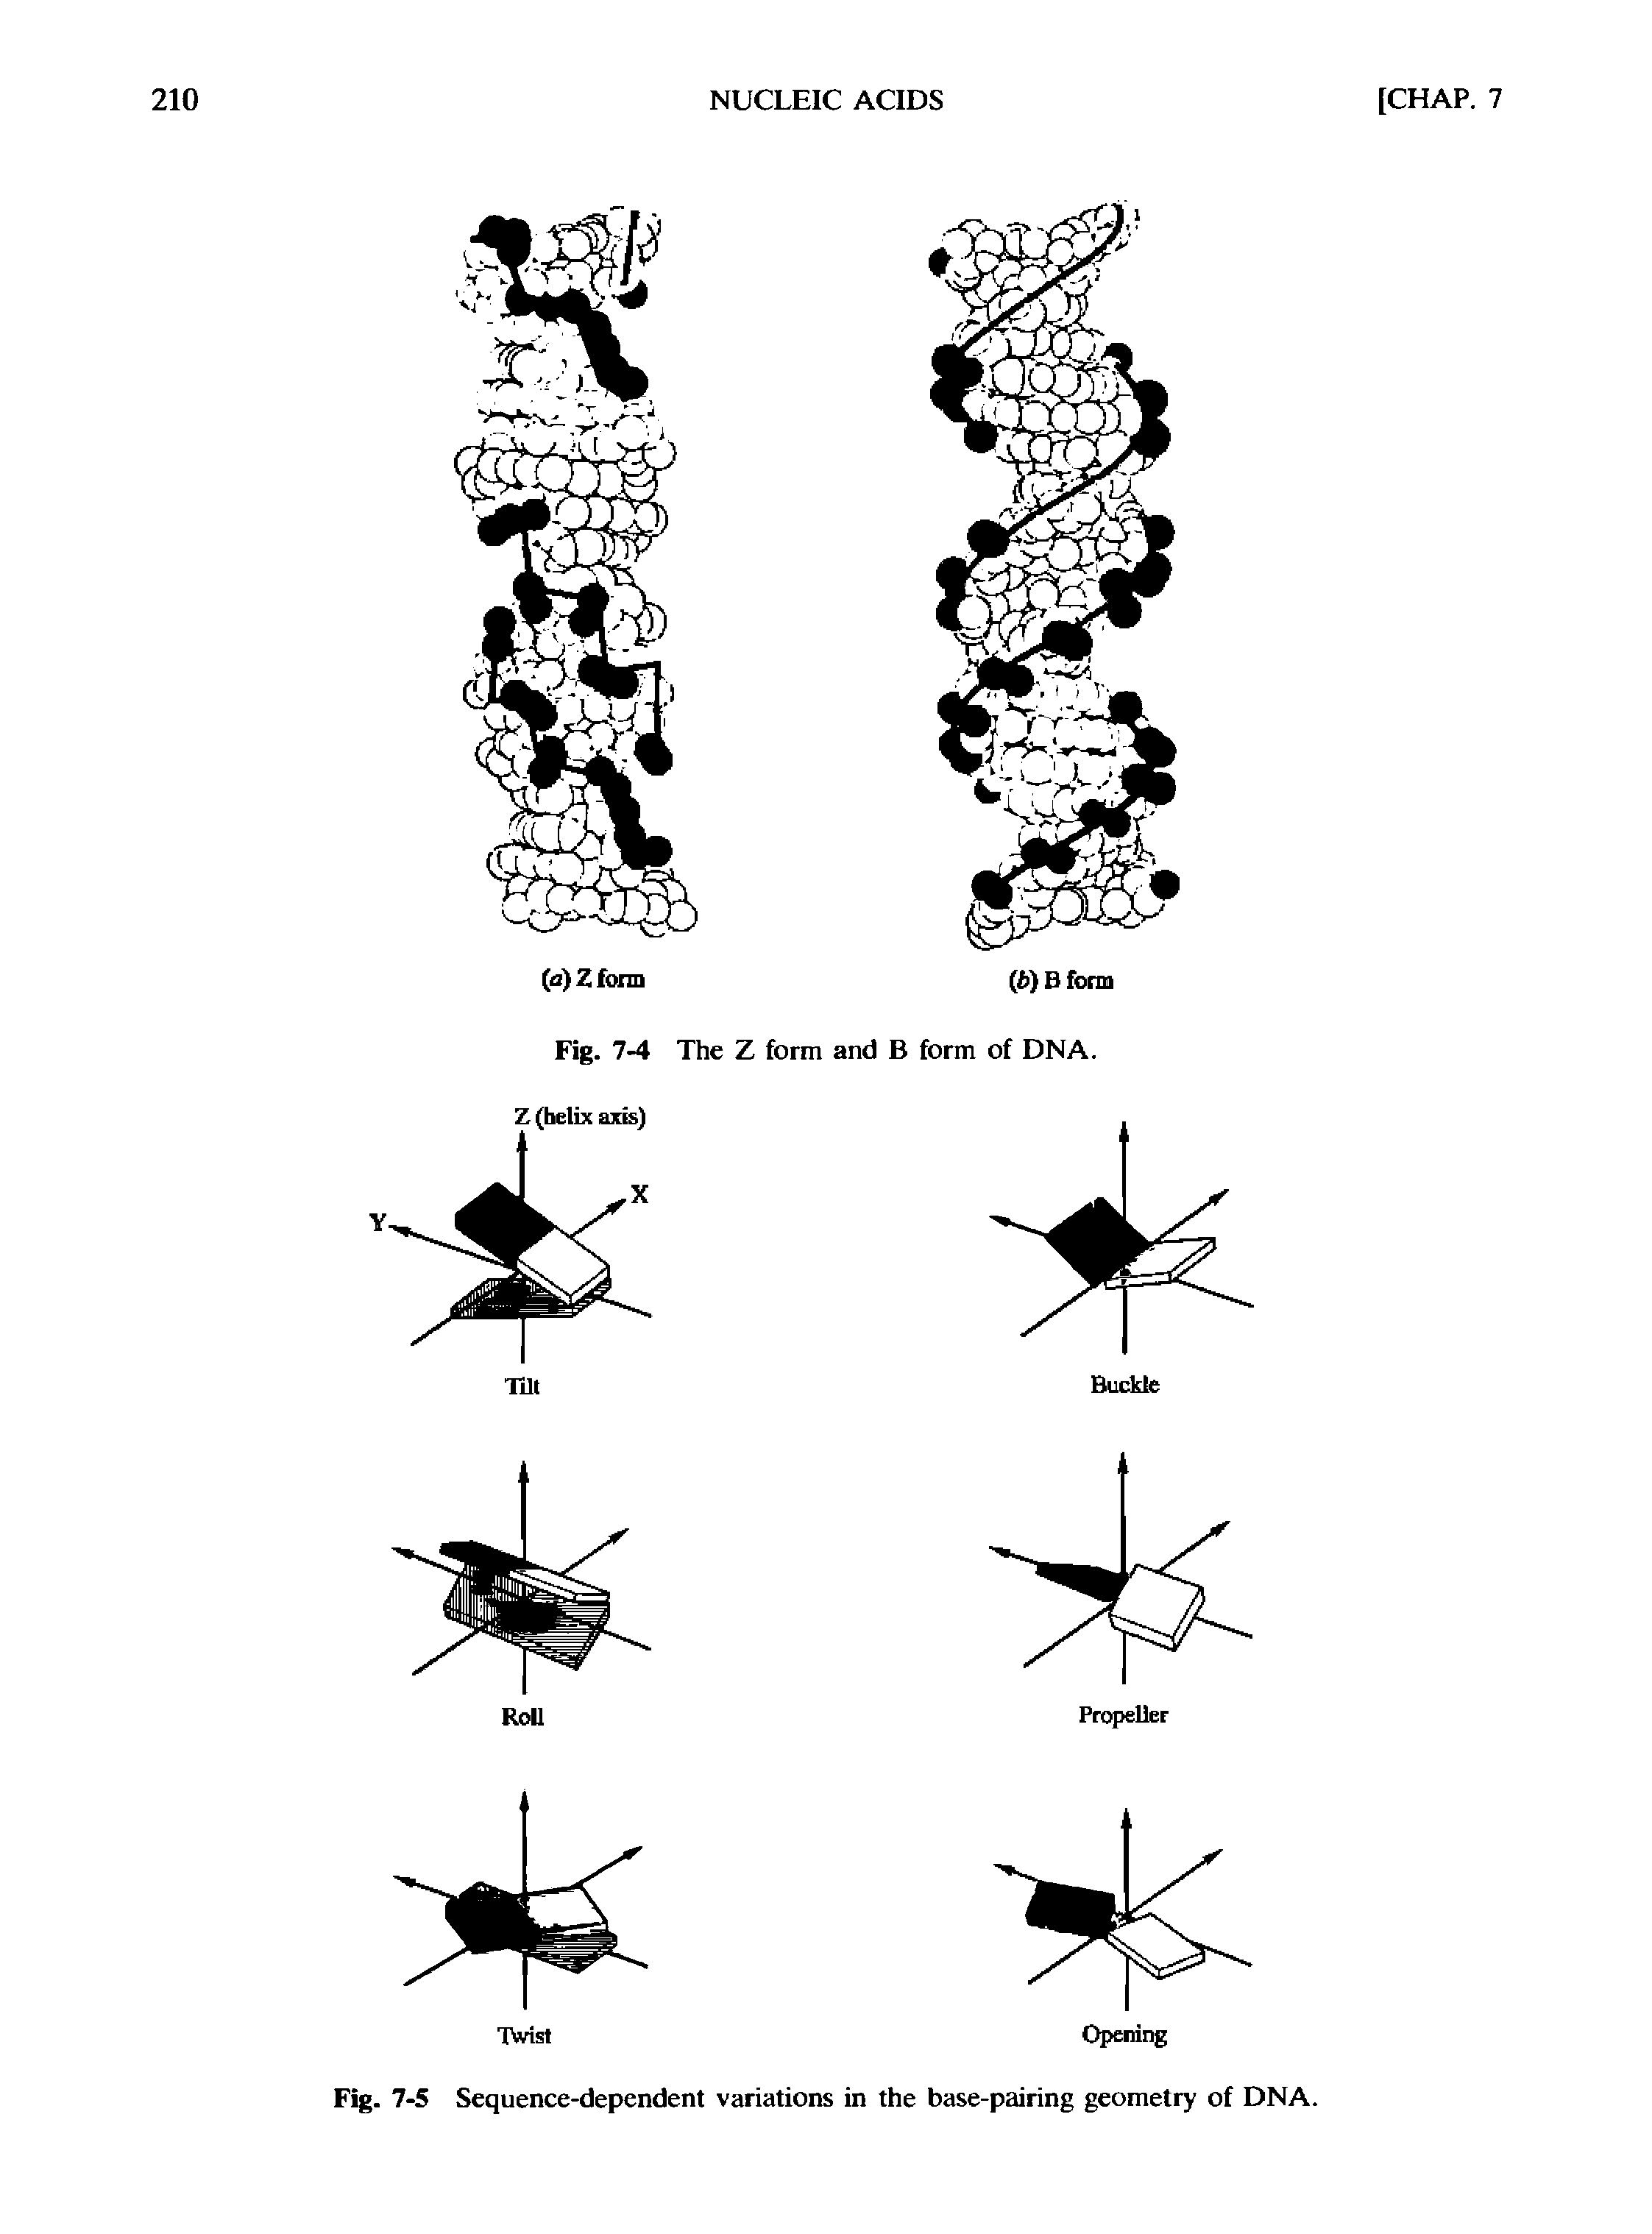 Fig. 7-5 Sequence-dependent variations in the base-pairing geometry of DNA.